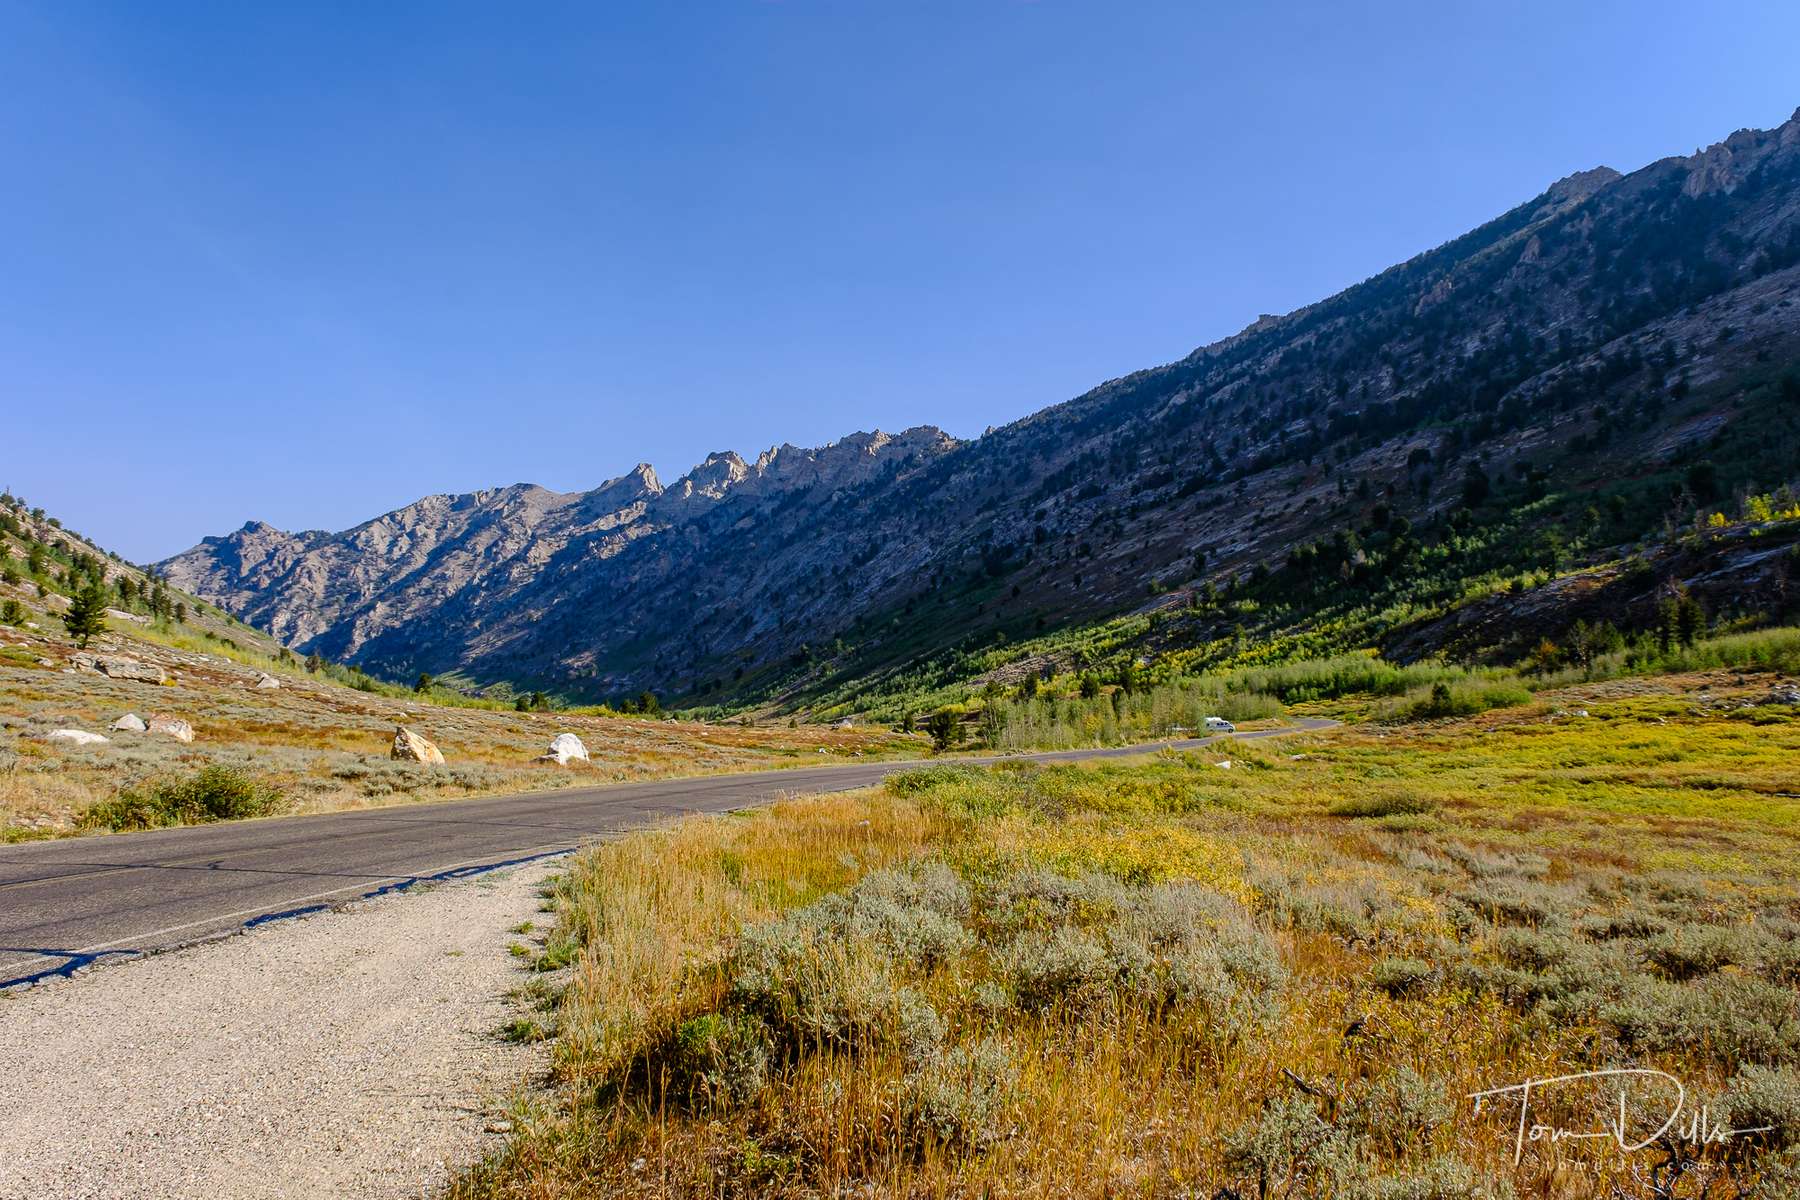 Lamoille Canyon Scenic Byway, part of the Humboldt-Toiyabe National Forest in eastern Nevada near Elko